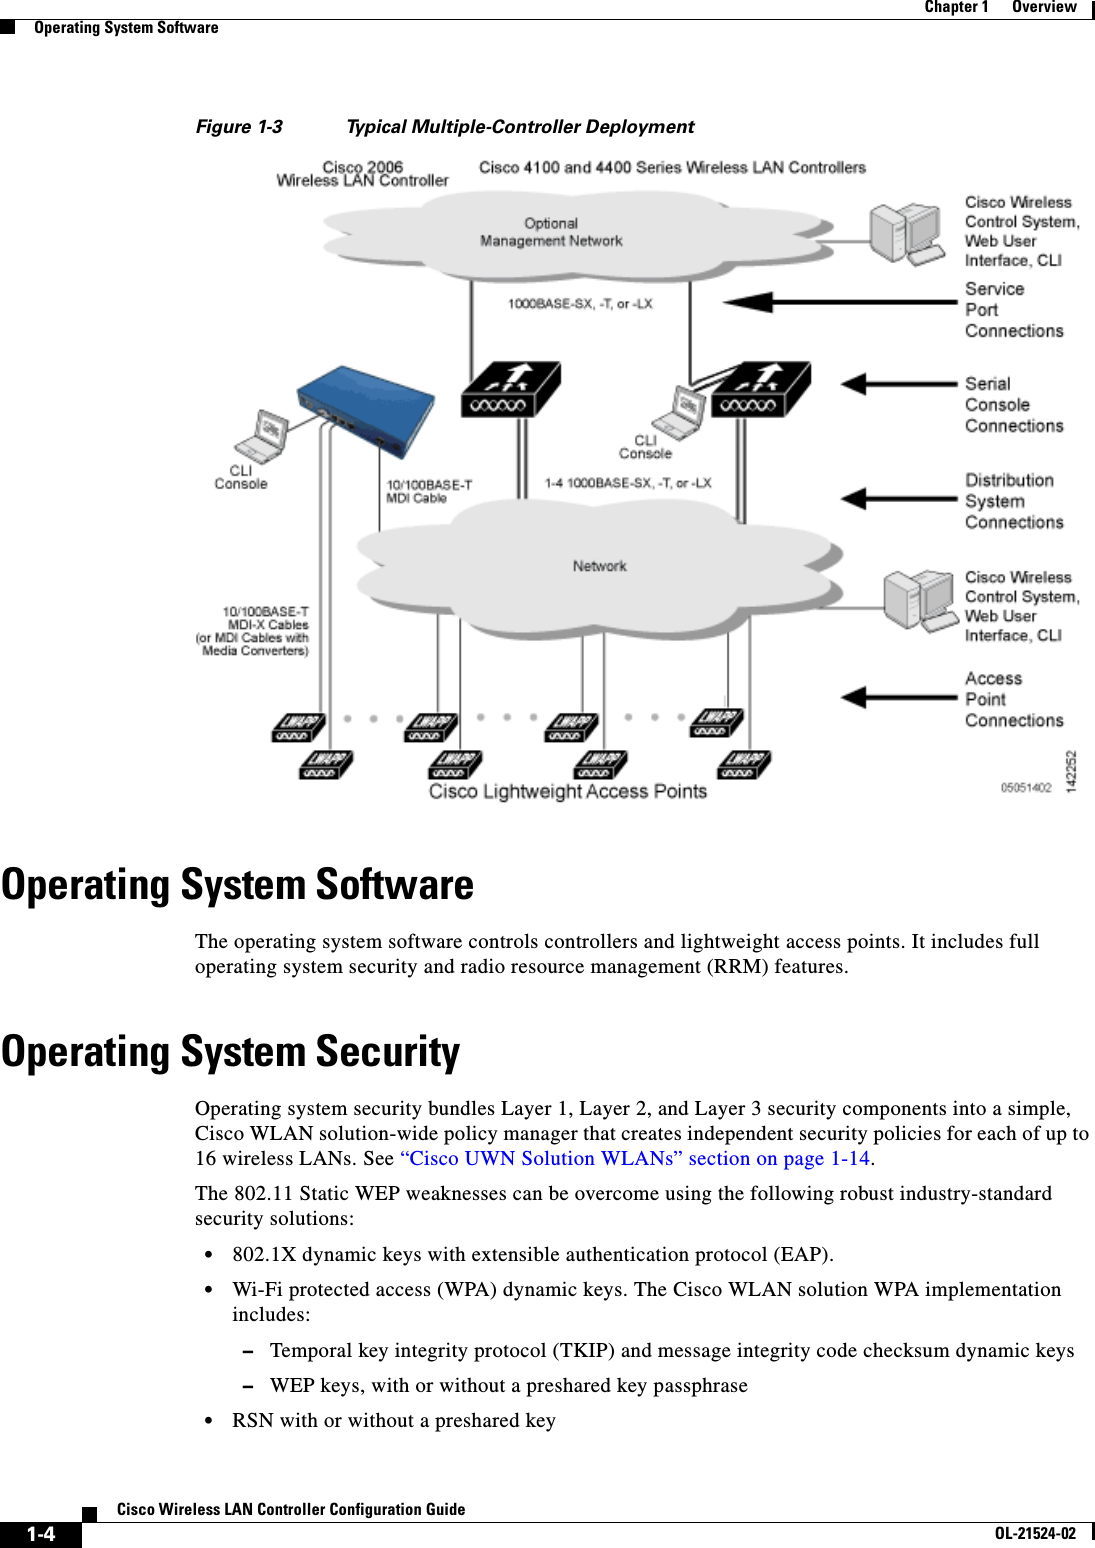  1-4Cisco Wireless LAN Controller Configuration GuideOL-21524-02Chapter 1      OverviewOperating System SoftwareFigure 1-3 Typical Multiple-Controller DeploymentOperating System SoftwareThe operating system software controls controllers and lightweight access points. It includes full operating system security and radio resource management (RRM) features. Operating System SecurityOperating system security bundles Layer 1, Layer 2, and Layer 3 security components into a simple, Cisco WLAN solution-wide policy manager that creates independent security policies for each of up to 16 wireless LANs. See “Cisco UWN Solution WLANs” section on page 1-14.The 802.11 Static WEP weaknesses can be overcome using the following robust industry-standard security solutions:  • 802.1X dynamic keys with extensible authentication protocol (EAP).  • Wi-Fi protected access (WPA) dynamic keys. The Cisco WLAN solution WPA implementation includes:   –Temporal key integrity protocol (TKIP) and message integrity code checksum dynamic keys  –WEP keys, with or without a preshared key passphrase  • RSN with or without a preshared key